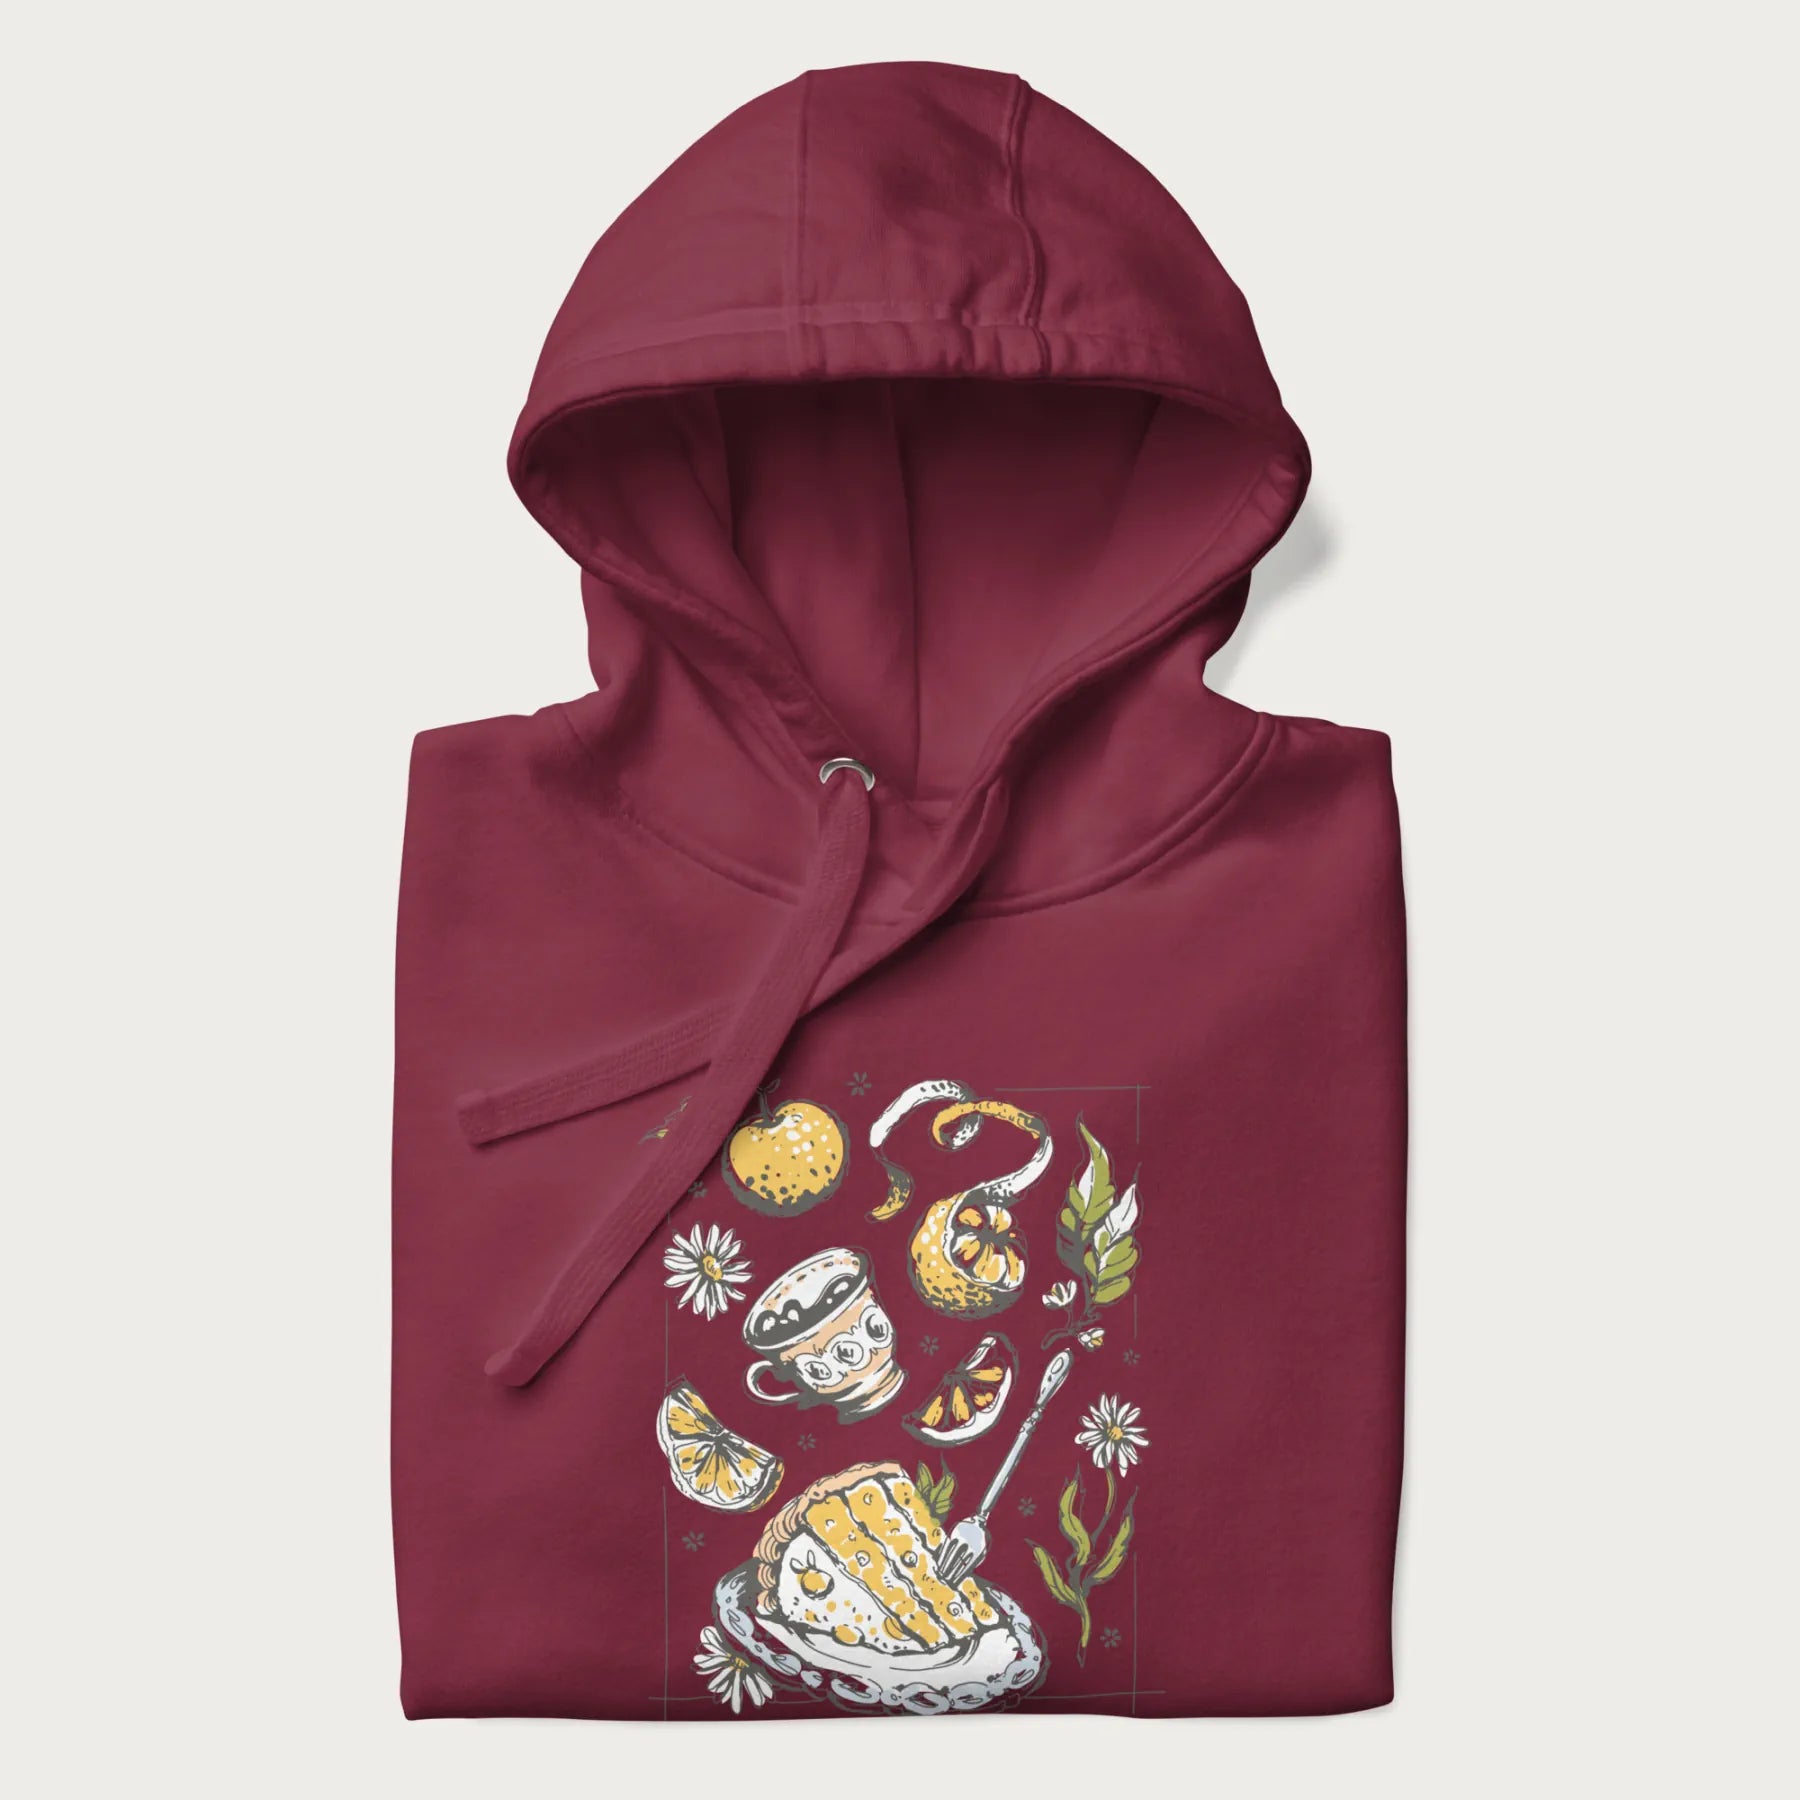 Folded maroon hoodie featuring a Cottagecore-themed graphic with oranges, a floral porcelain cup, orange pie, and daisies.